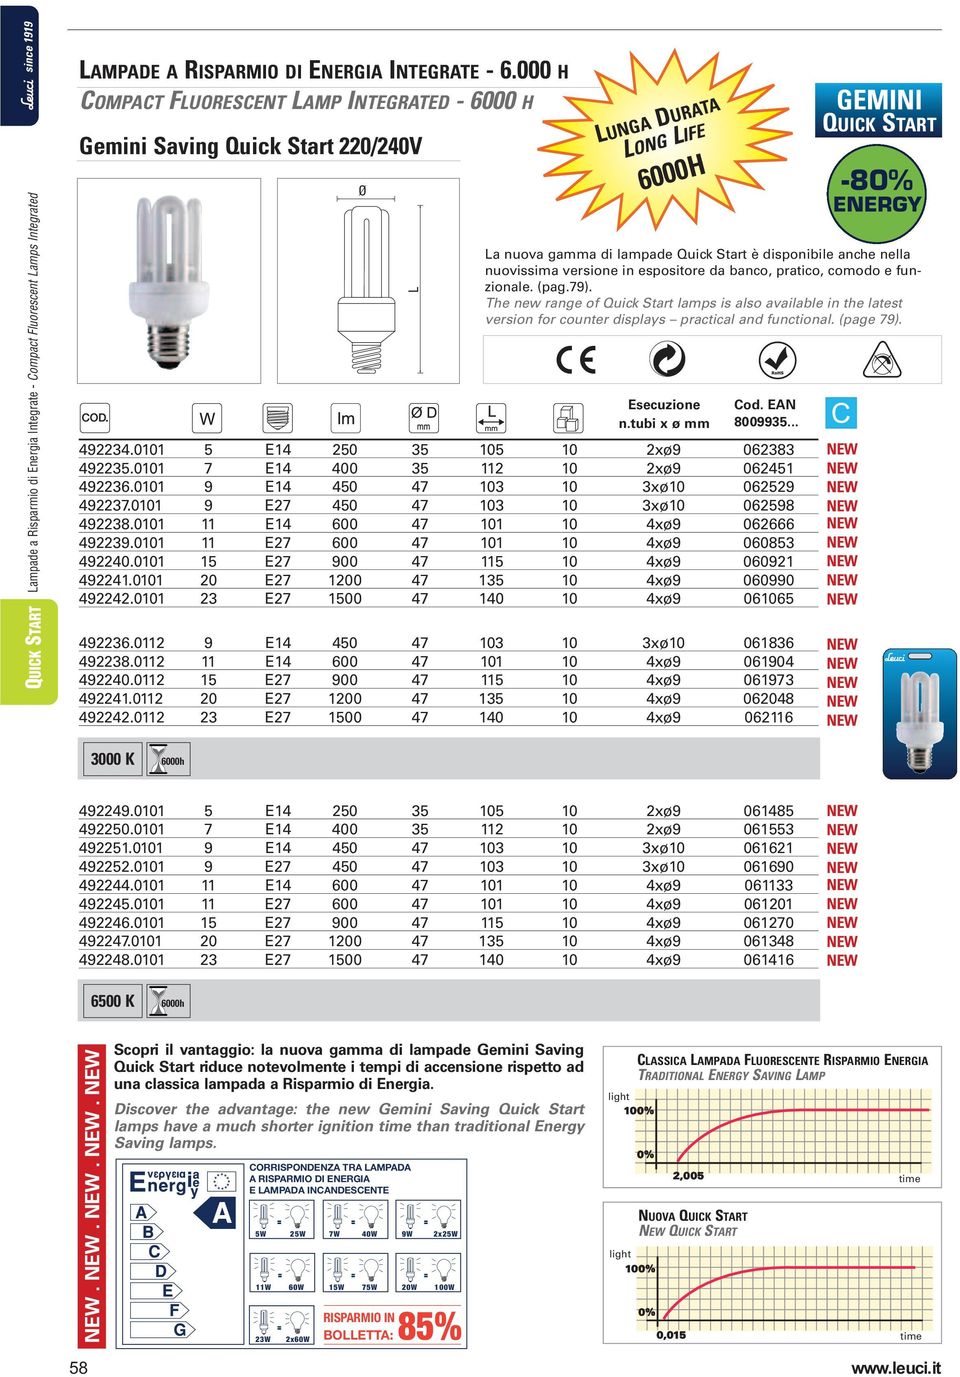 versione in espositore da banco, pratico, comodo e funzionale. (pag.79). The new range of Quick Start lamps is also available in the latest version for counter displays practical and functional.